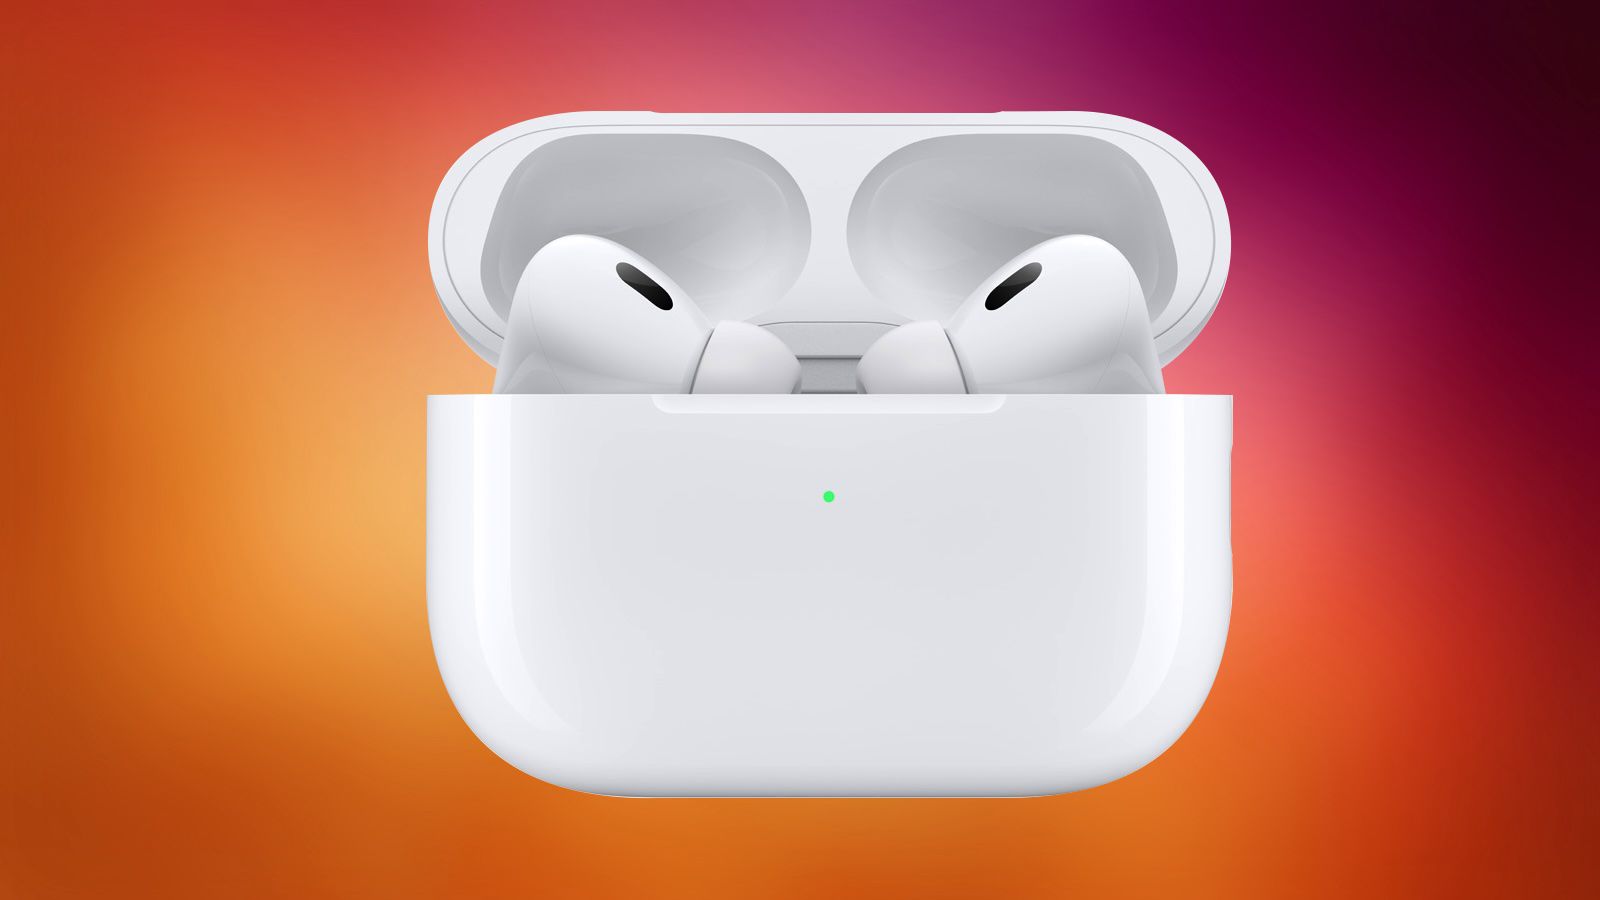 Senior official exits Apple’s Acoustics division, fresh leadership in store for AirPods and HomePod teams